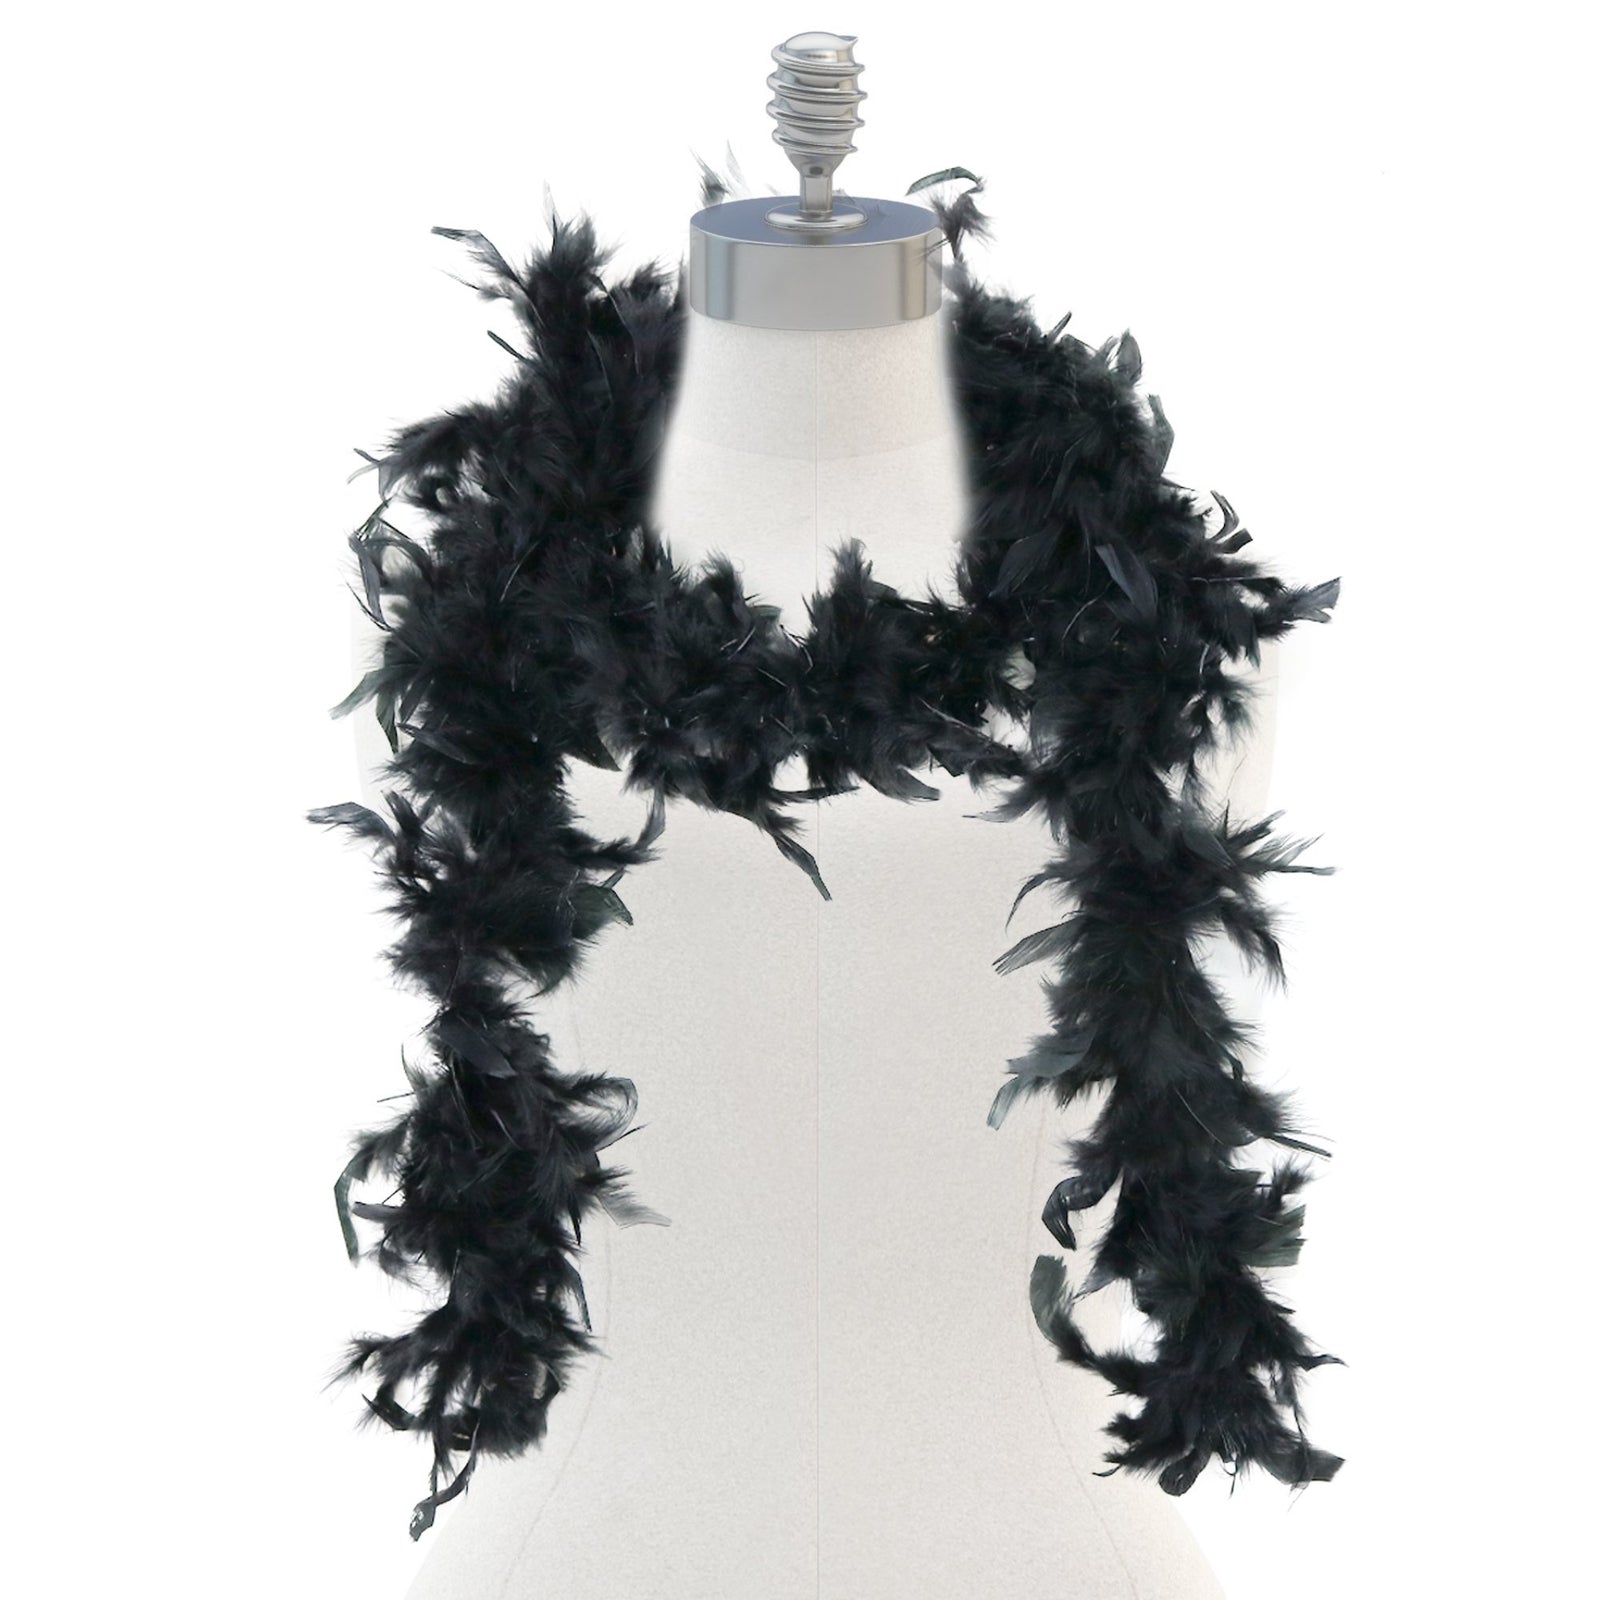 Skeleteen Feather Boa Costume Accessory - Great Black Boa with Feathers - 1 Piece